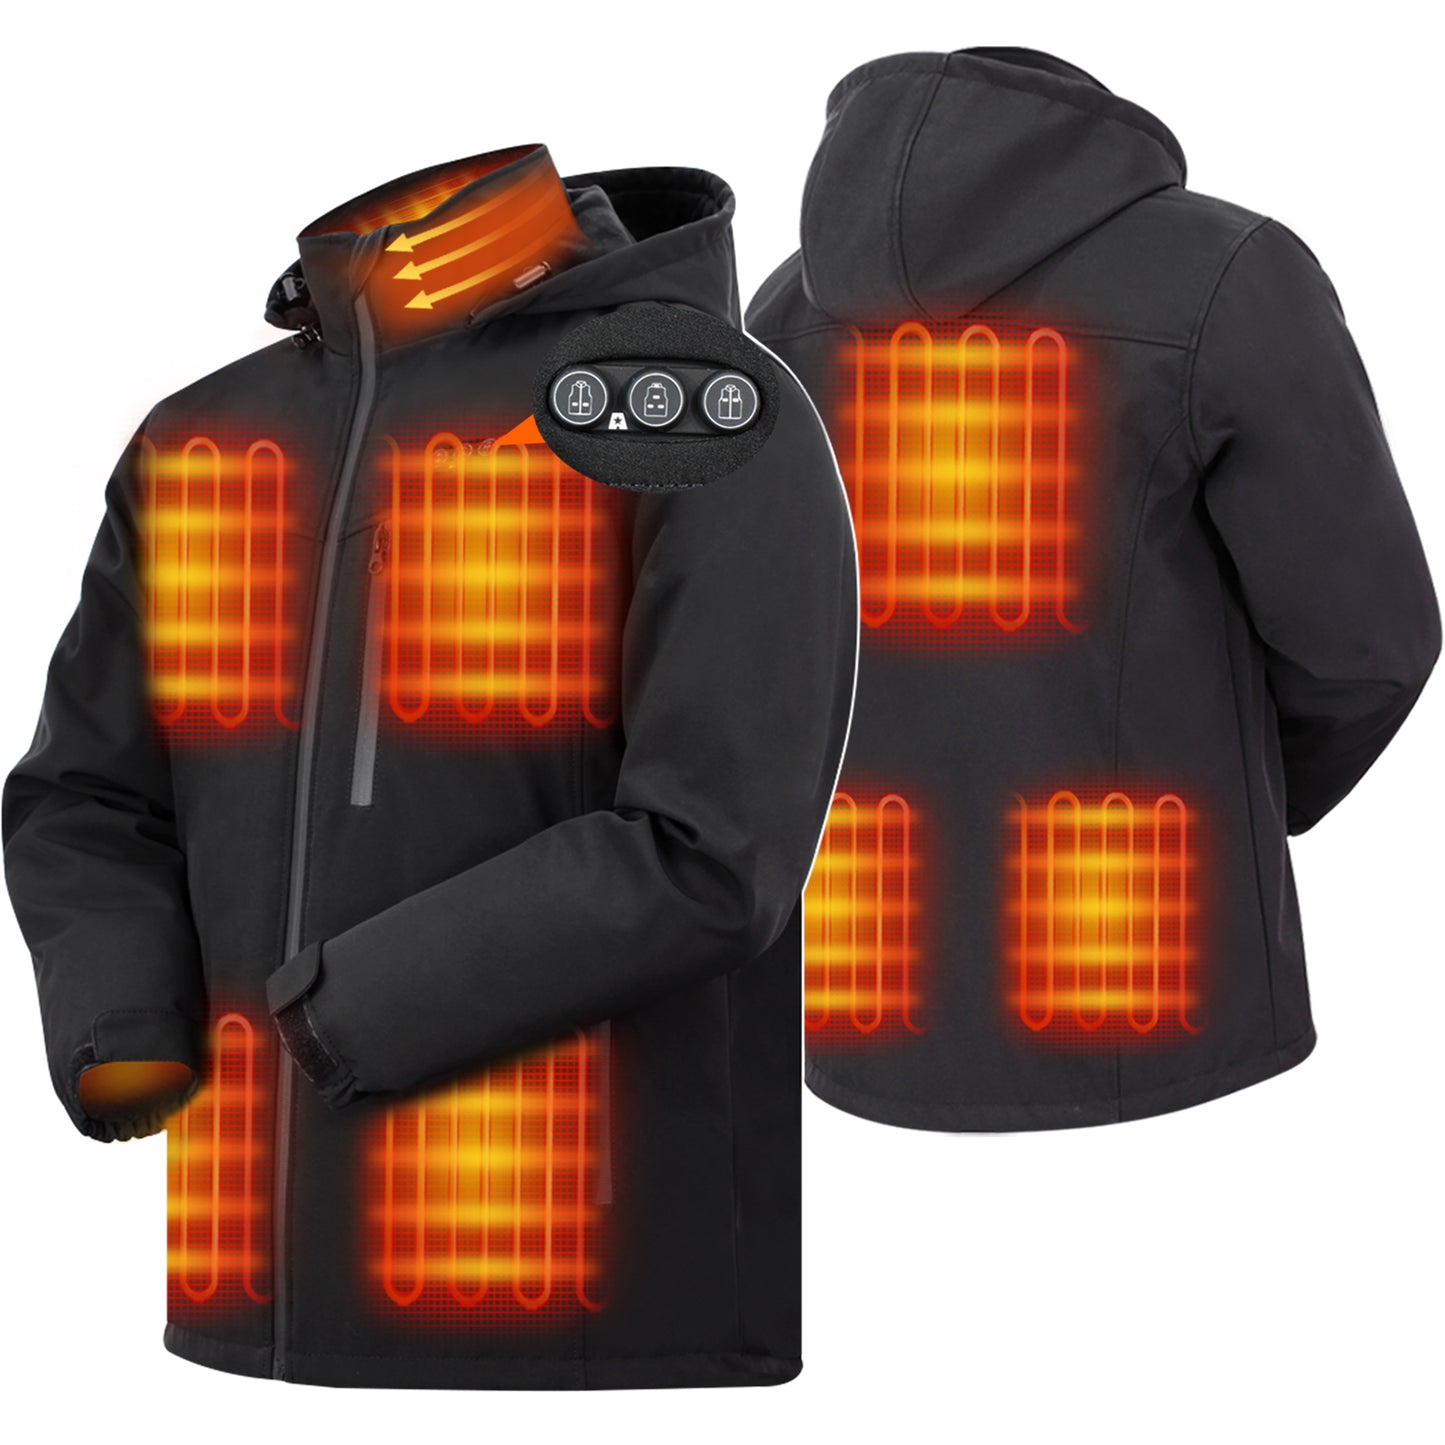 ARRIS Men`s Heated Jacket, Electric Heating Coat with 7.4V Battery and Detachable Hood - Waterproof, 8 Heating Areas